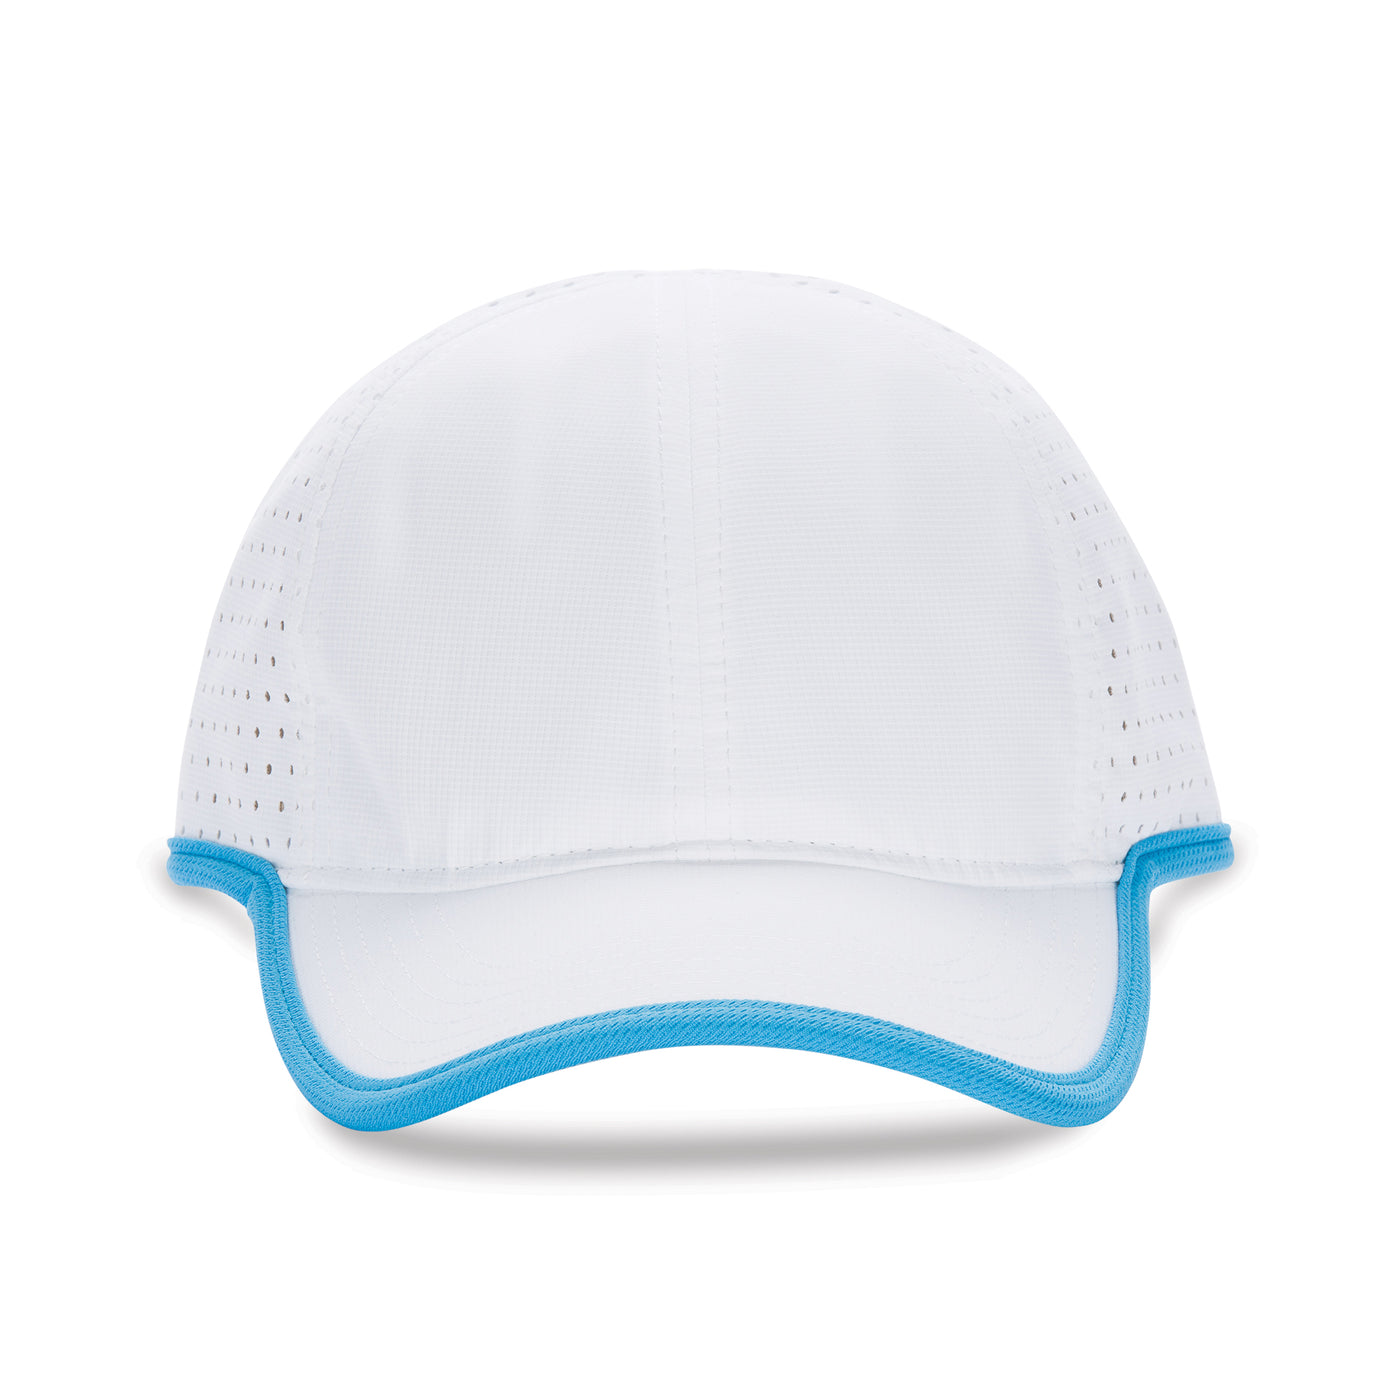 front view of white sport hat with blue trim.